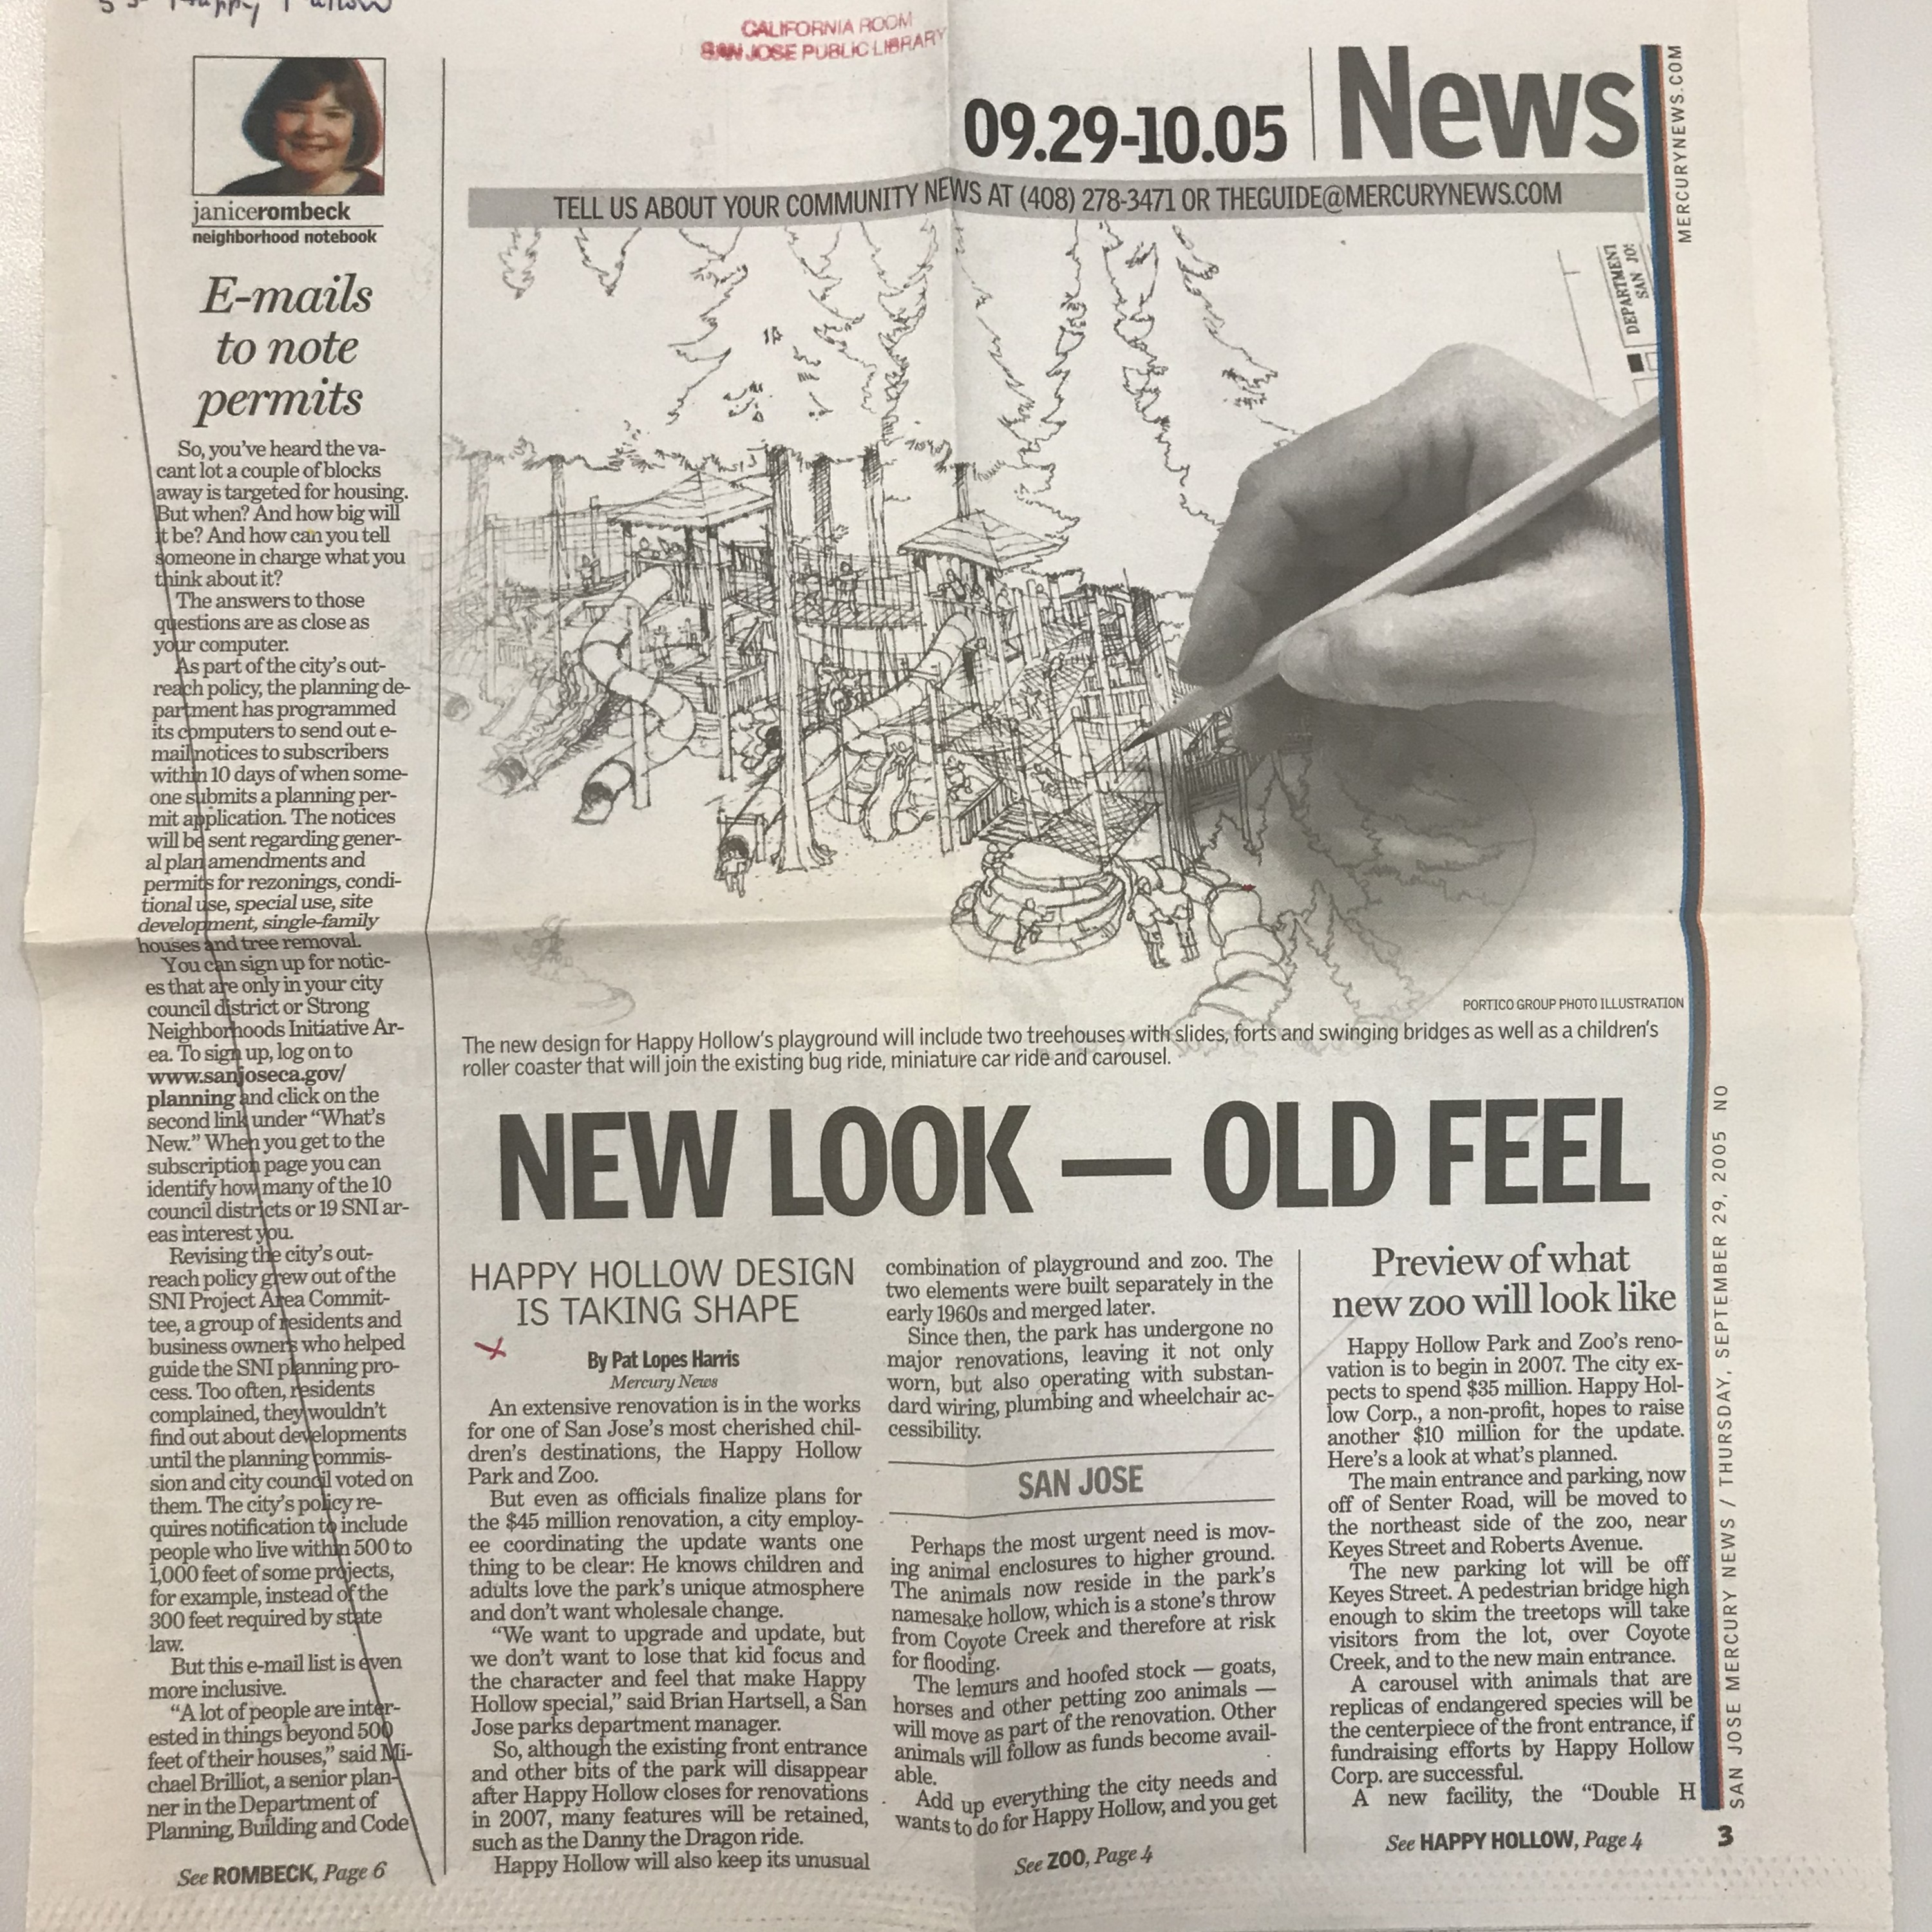 &quot;New Look - Old Feel&quot; Article